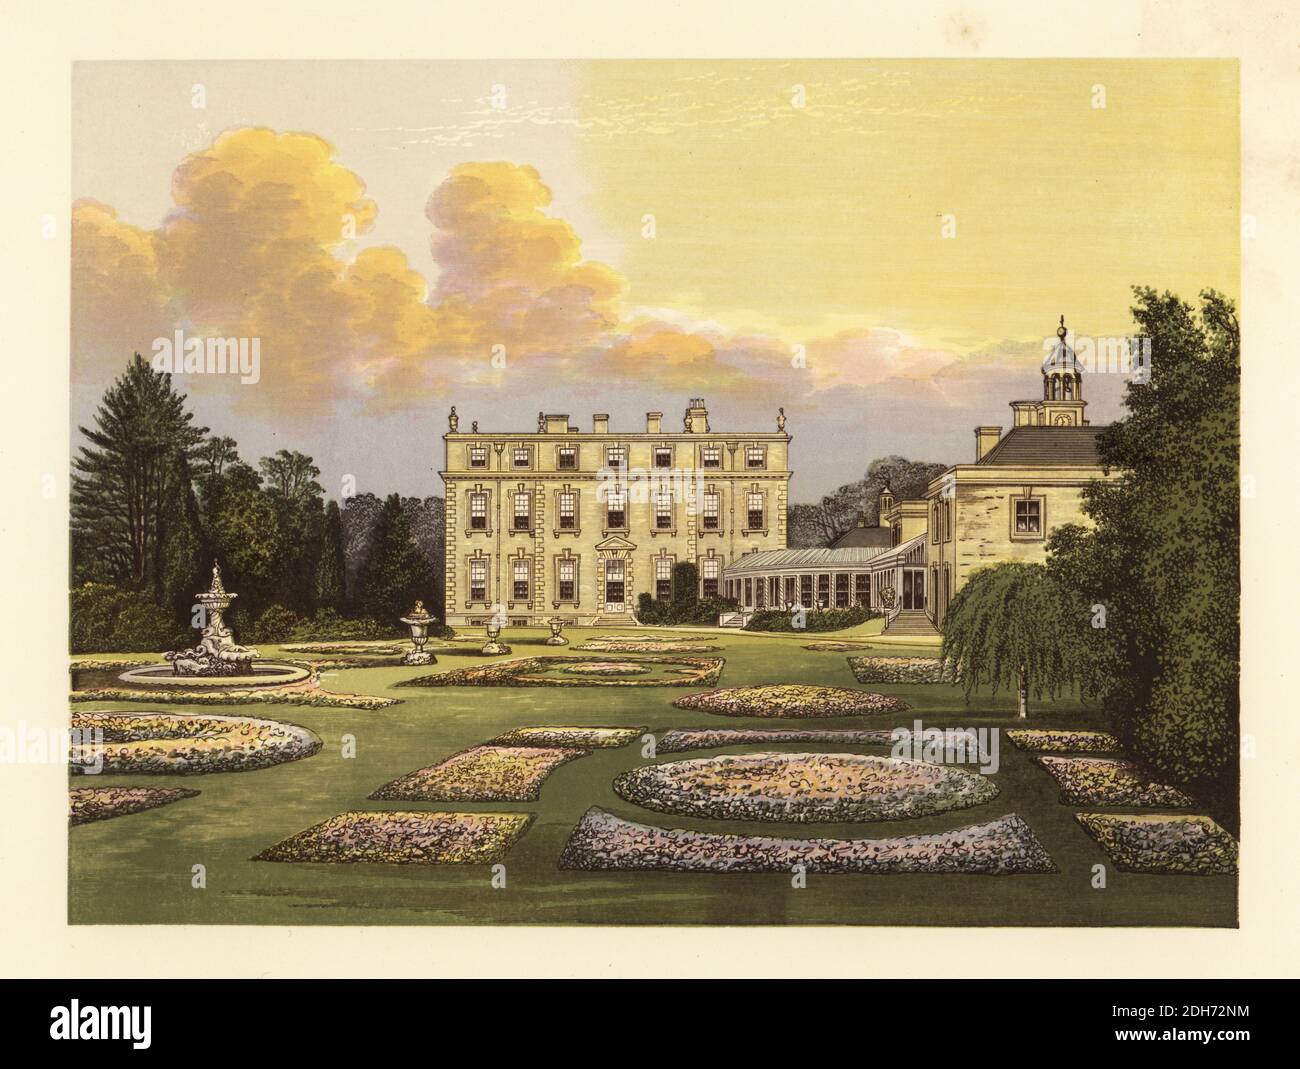 Ditchley House and gardens, Oxfordshire, England. Fine oak and stone house designed by architect James Gibb in 1722 for George Henry Lee I, 2nd Earl of Lichfield. Home of Arthur Edmund Denis Dillon, 16th Viscount Dillon. Colour woodblock by Benjamin Fawcett in the Baxter process of an illustration by Alexander Francis Lydon from Reverend Francis Orpen Morris’s A Series of Picturesque Views of the Seats of Noblemen and Gentlemen of Great Britain and Ireland, William Mackenzie, London, 1880. Stock Photo